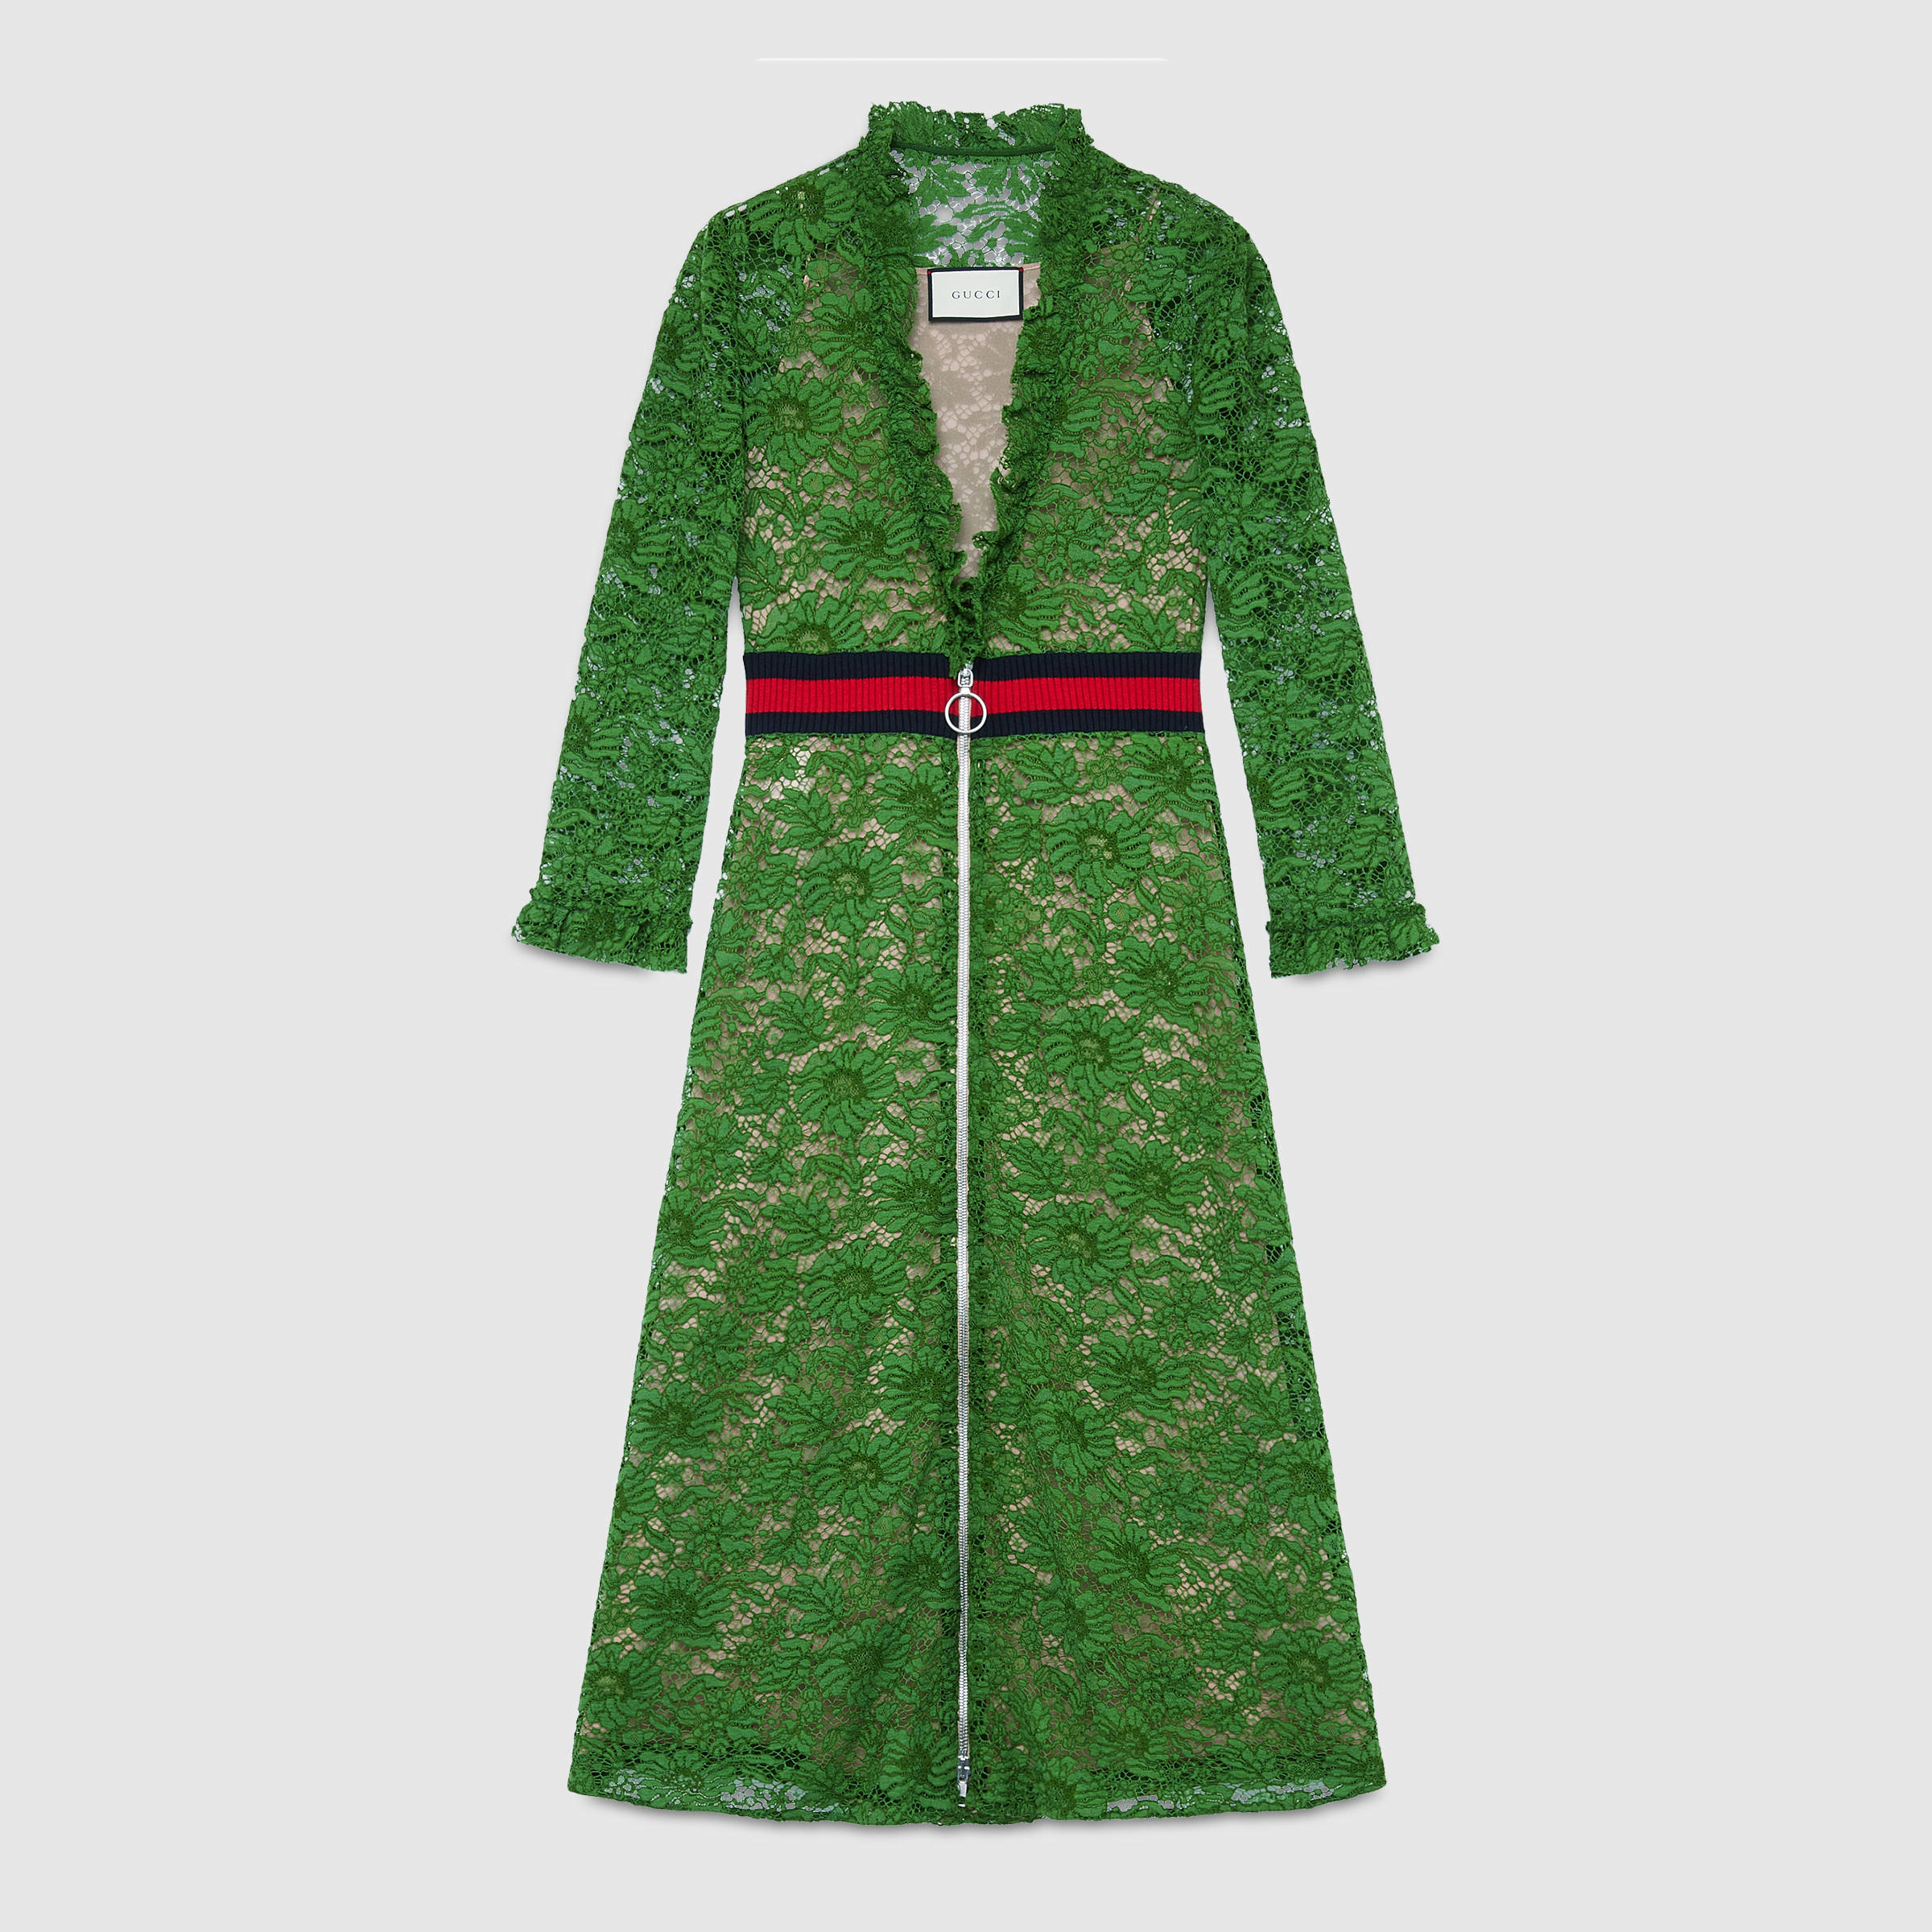 Gucci V-neck Lace Dress in Green | Lyst